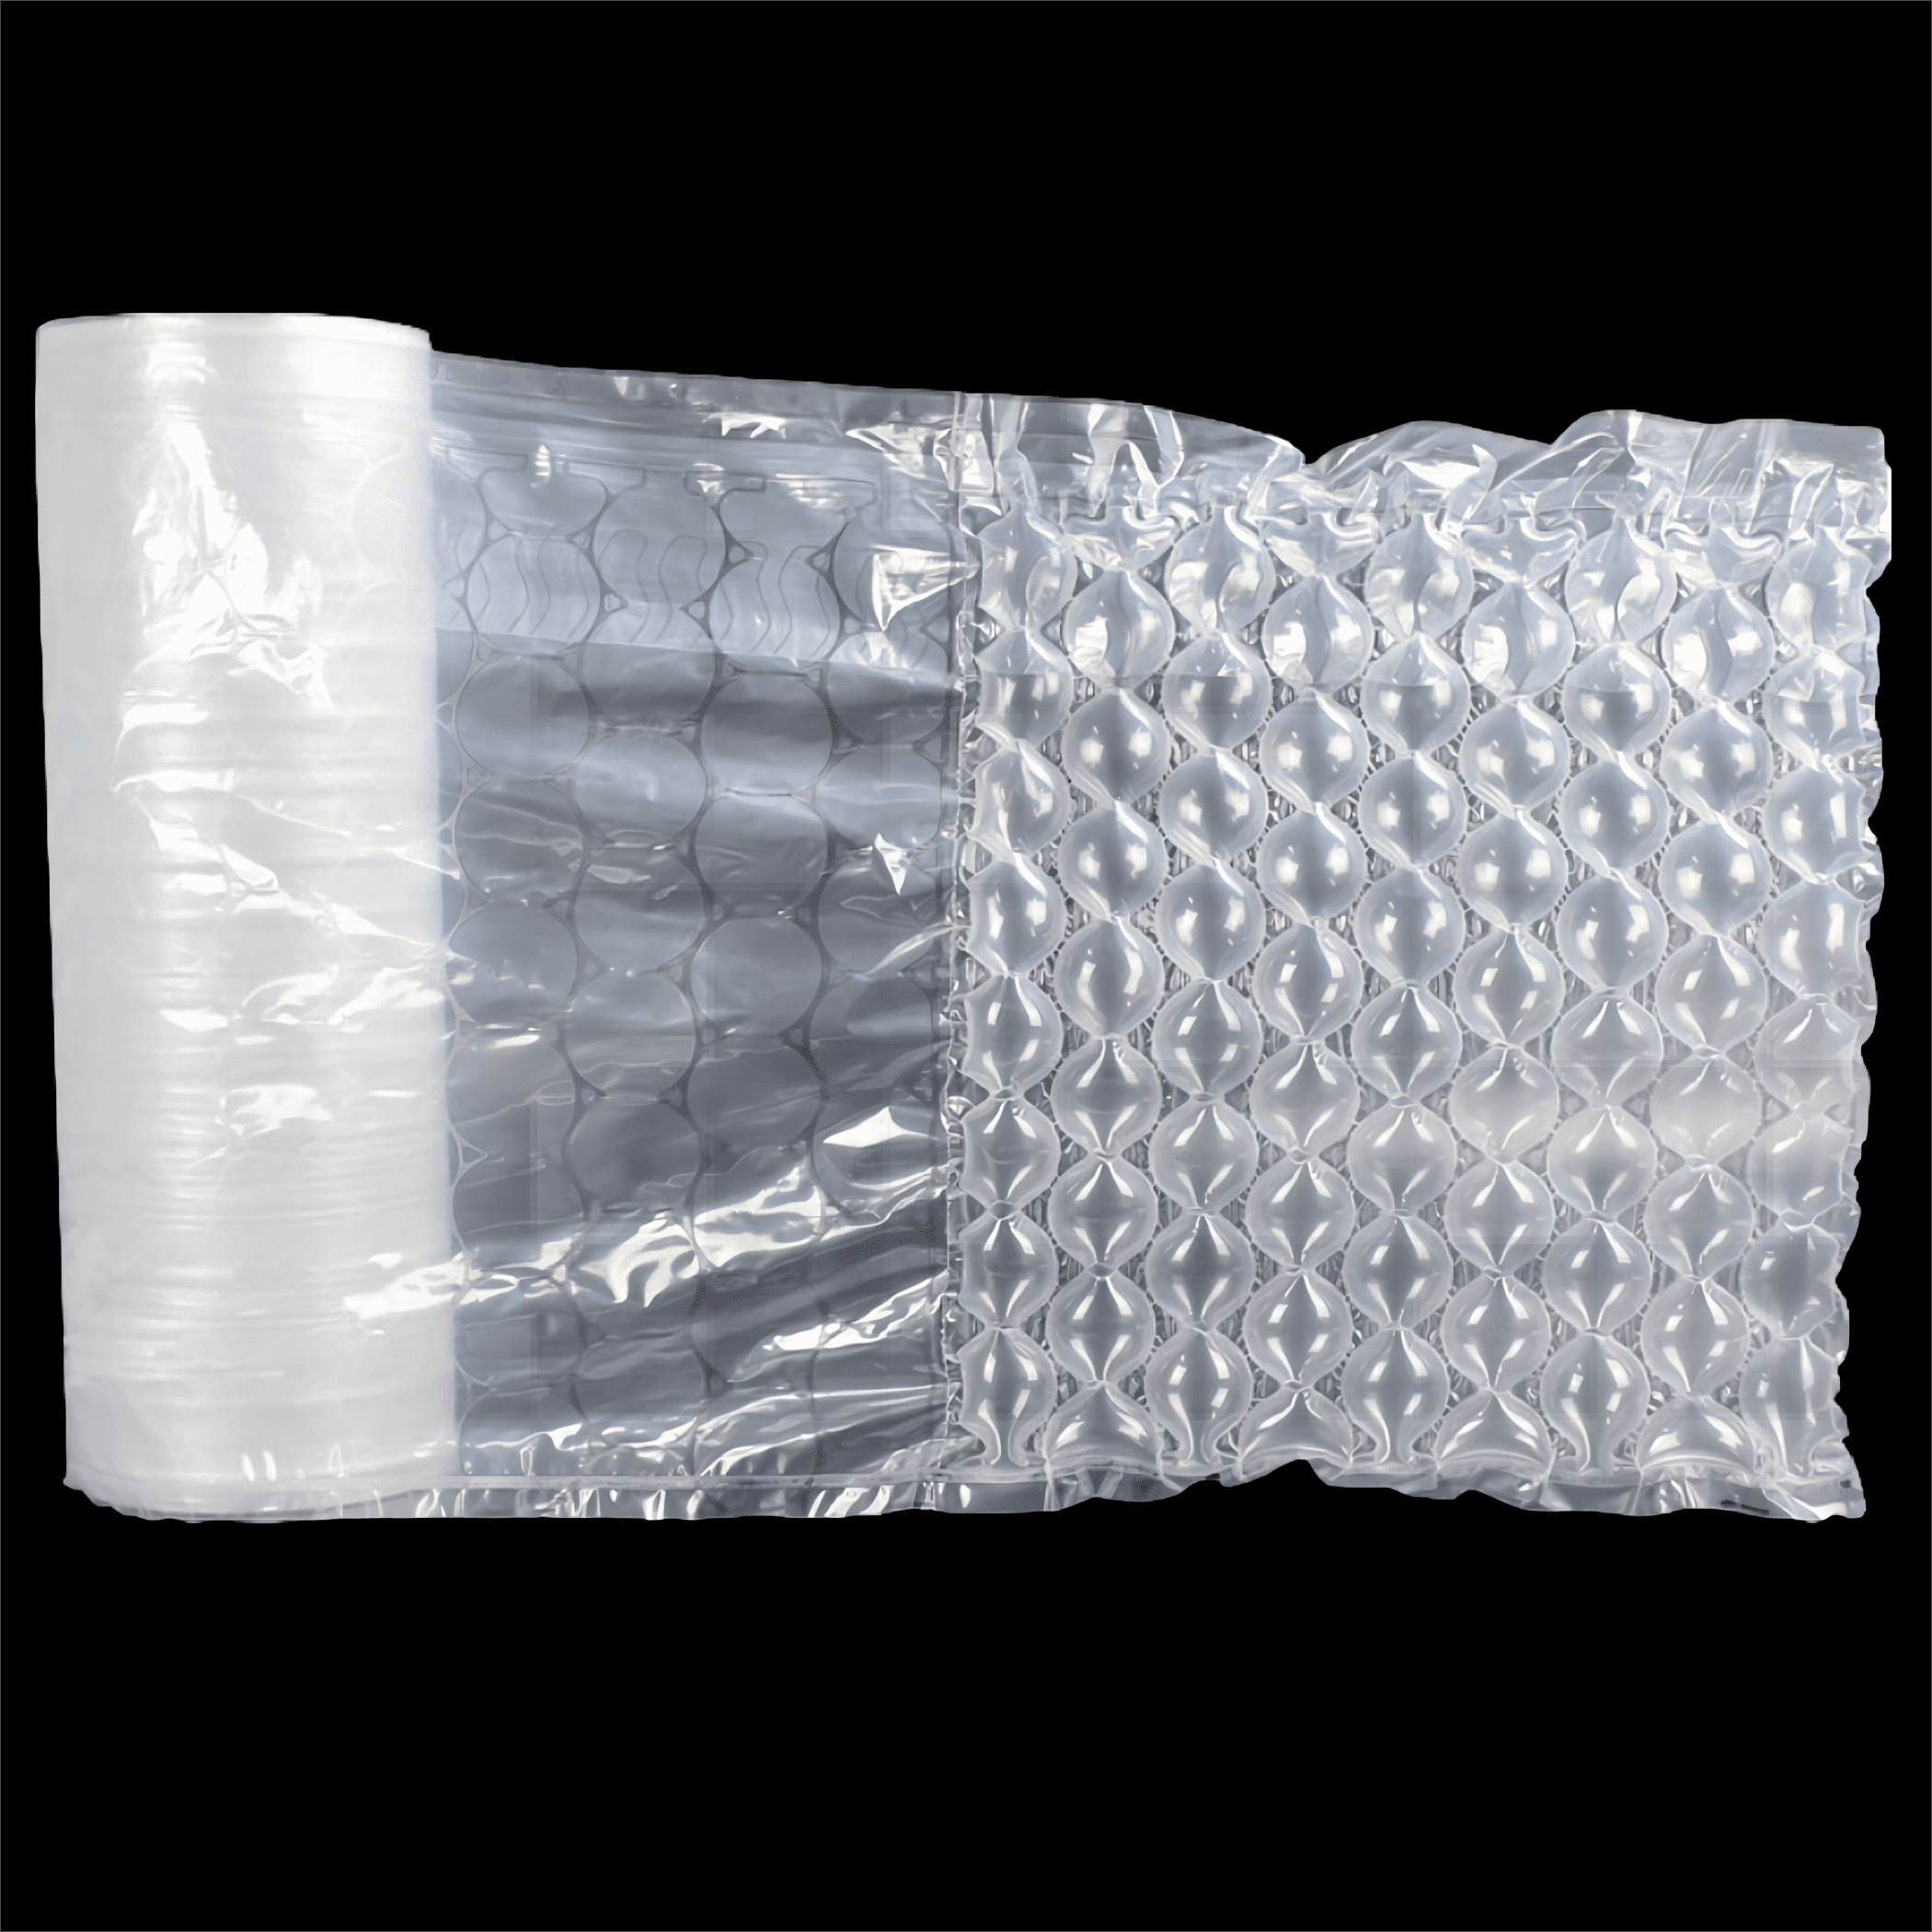 Trading Kart Air Bubble Wrap Roll For Packing, Packaging Material